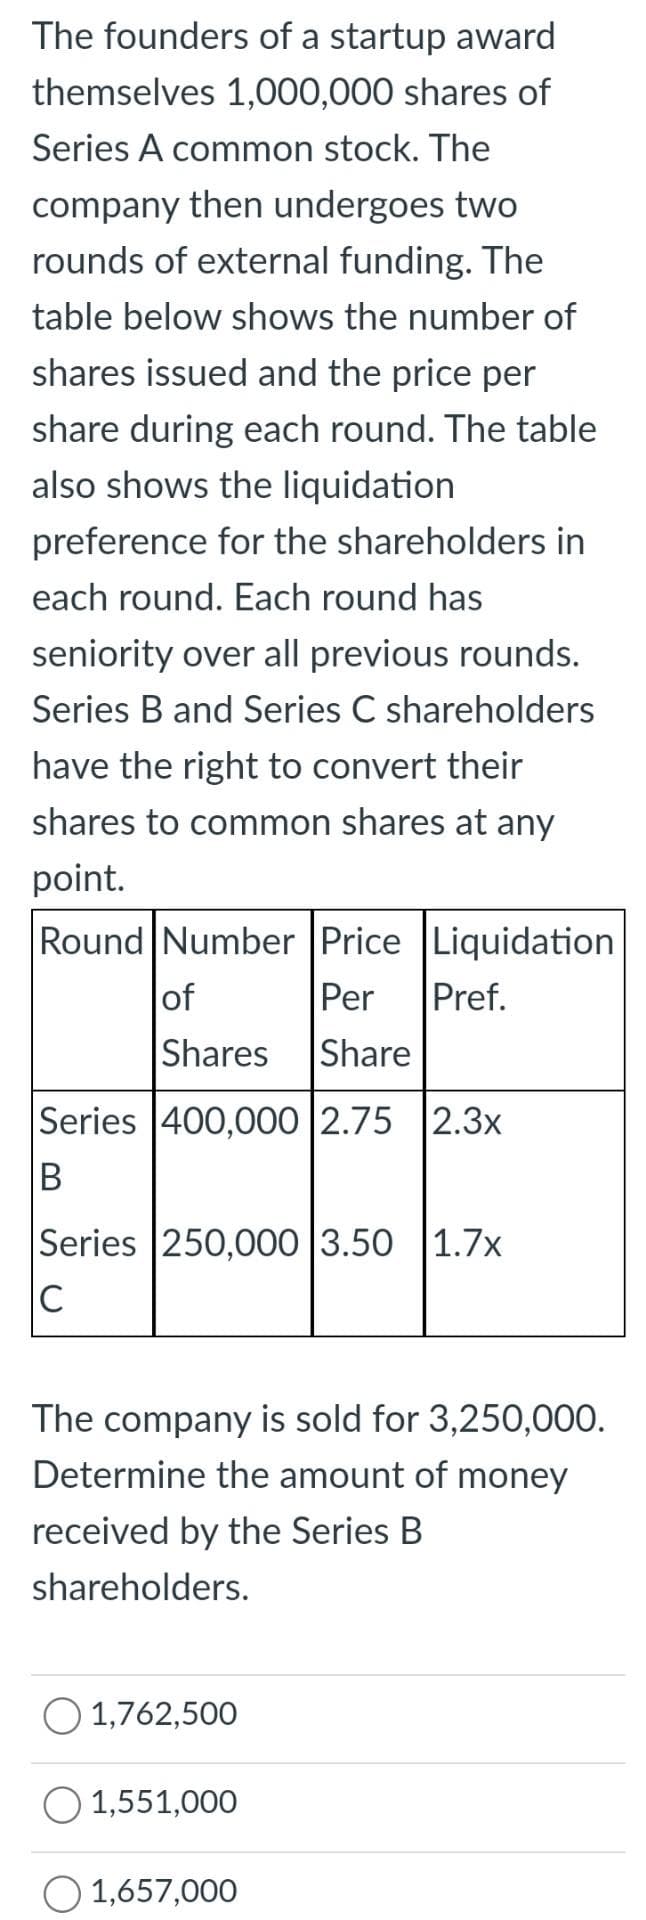 The founders of a startup award
themselves 1,000,000 shares of
Series A common stock. The
company then undergoes two
rounds of external funding. The
table below shows the number of
shares issued and the price per
share during each round. The table
also shows the liquidation
preference for the shareholders in
each round. Each round has
seniority over all previous rounds.
Series B and Series C shareholders
have the right to convert their
shares to common shares at any
point.
Round Number Price Liquidation
of
Per
Pref.
Shares
Share
Series 400,000 2.75 2.3x
B
Series 250,00 |3.50 |1.7x
C
The company is sold for 3,250,000.
Determine the amount of money
received by the Series B
shareholders.
O 1,762,500
O 1,551,000
1,657,000
